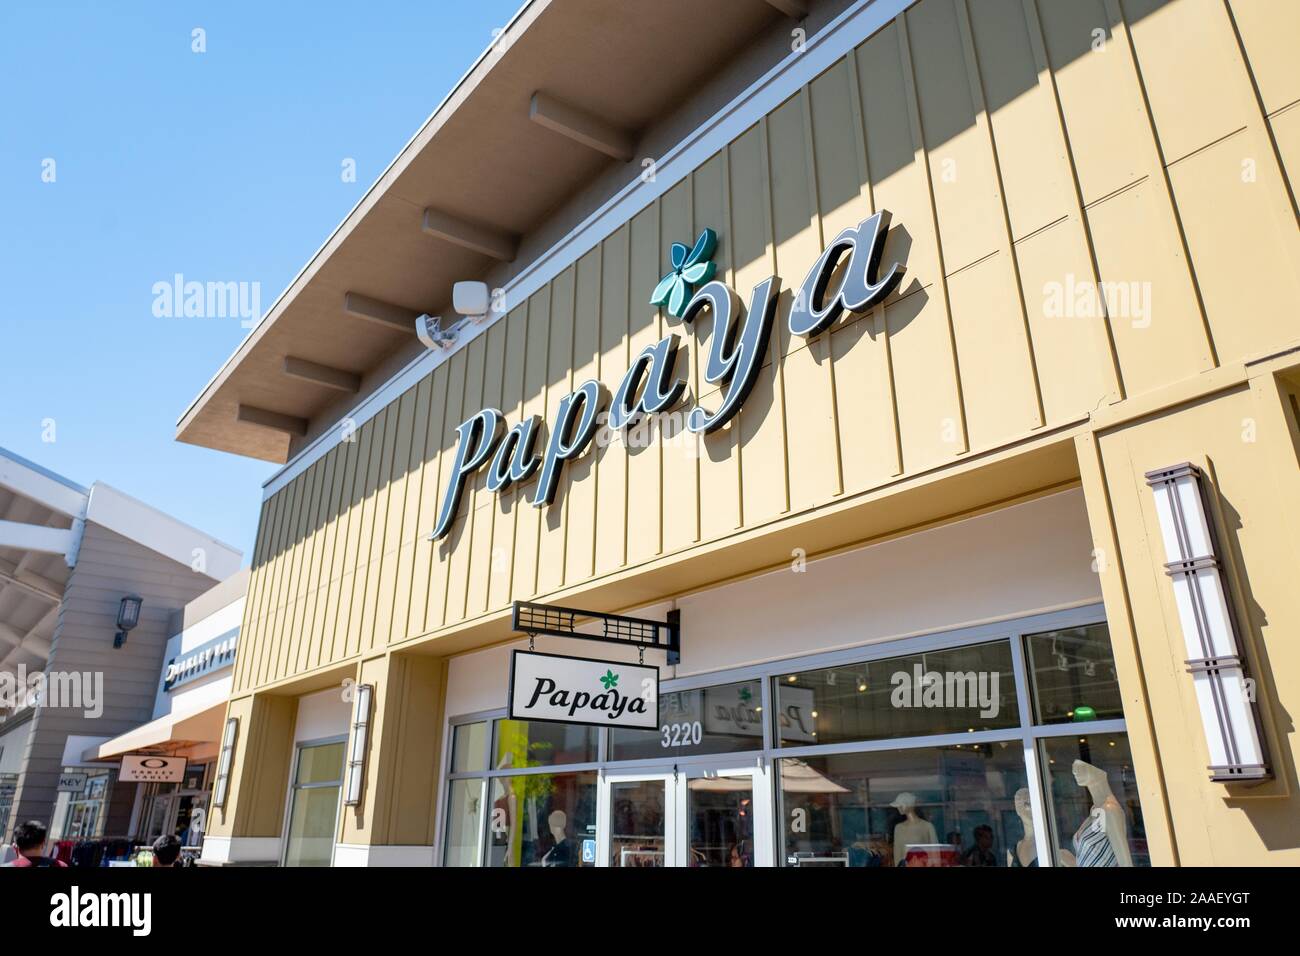 Facade with sign and logo at store of women's clothing retailer Papaya in Livermore, California, September 2, 2019. () Stock Photo